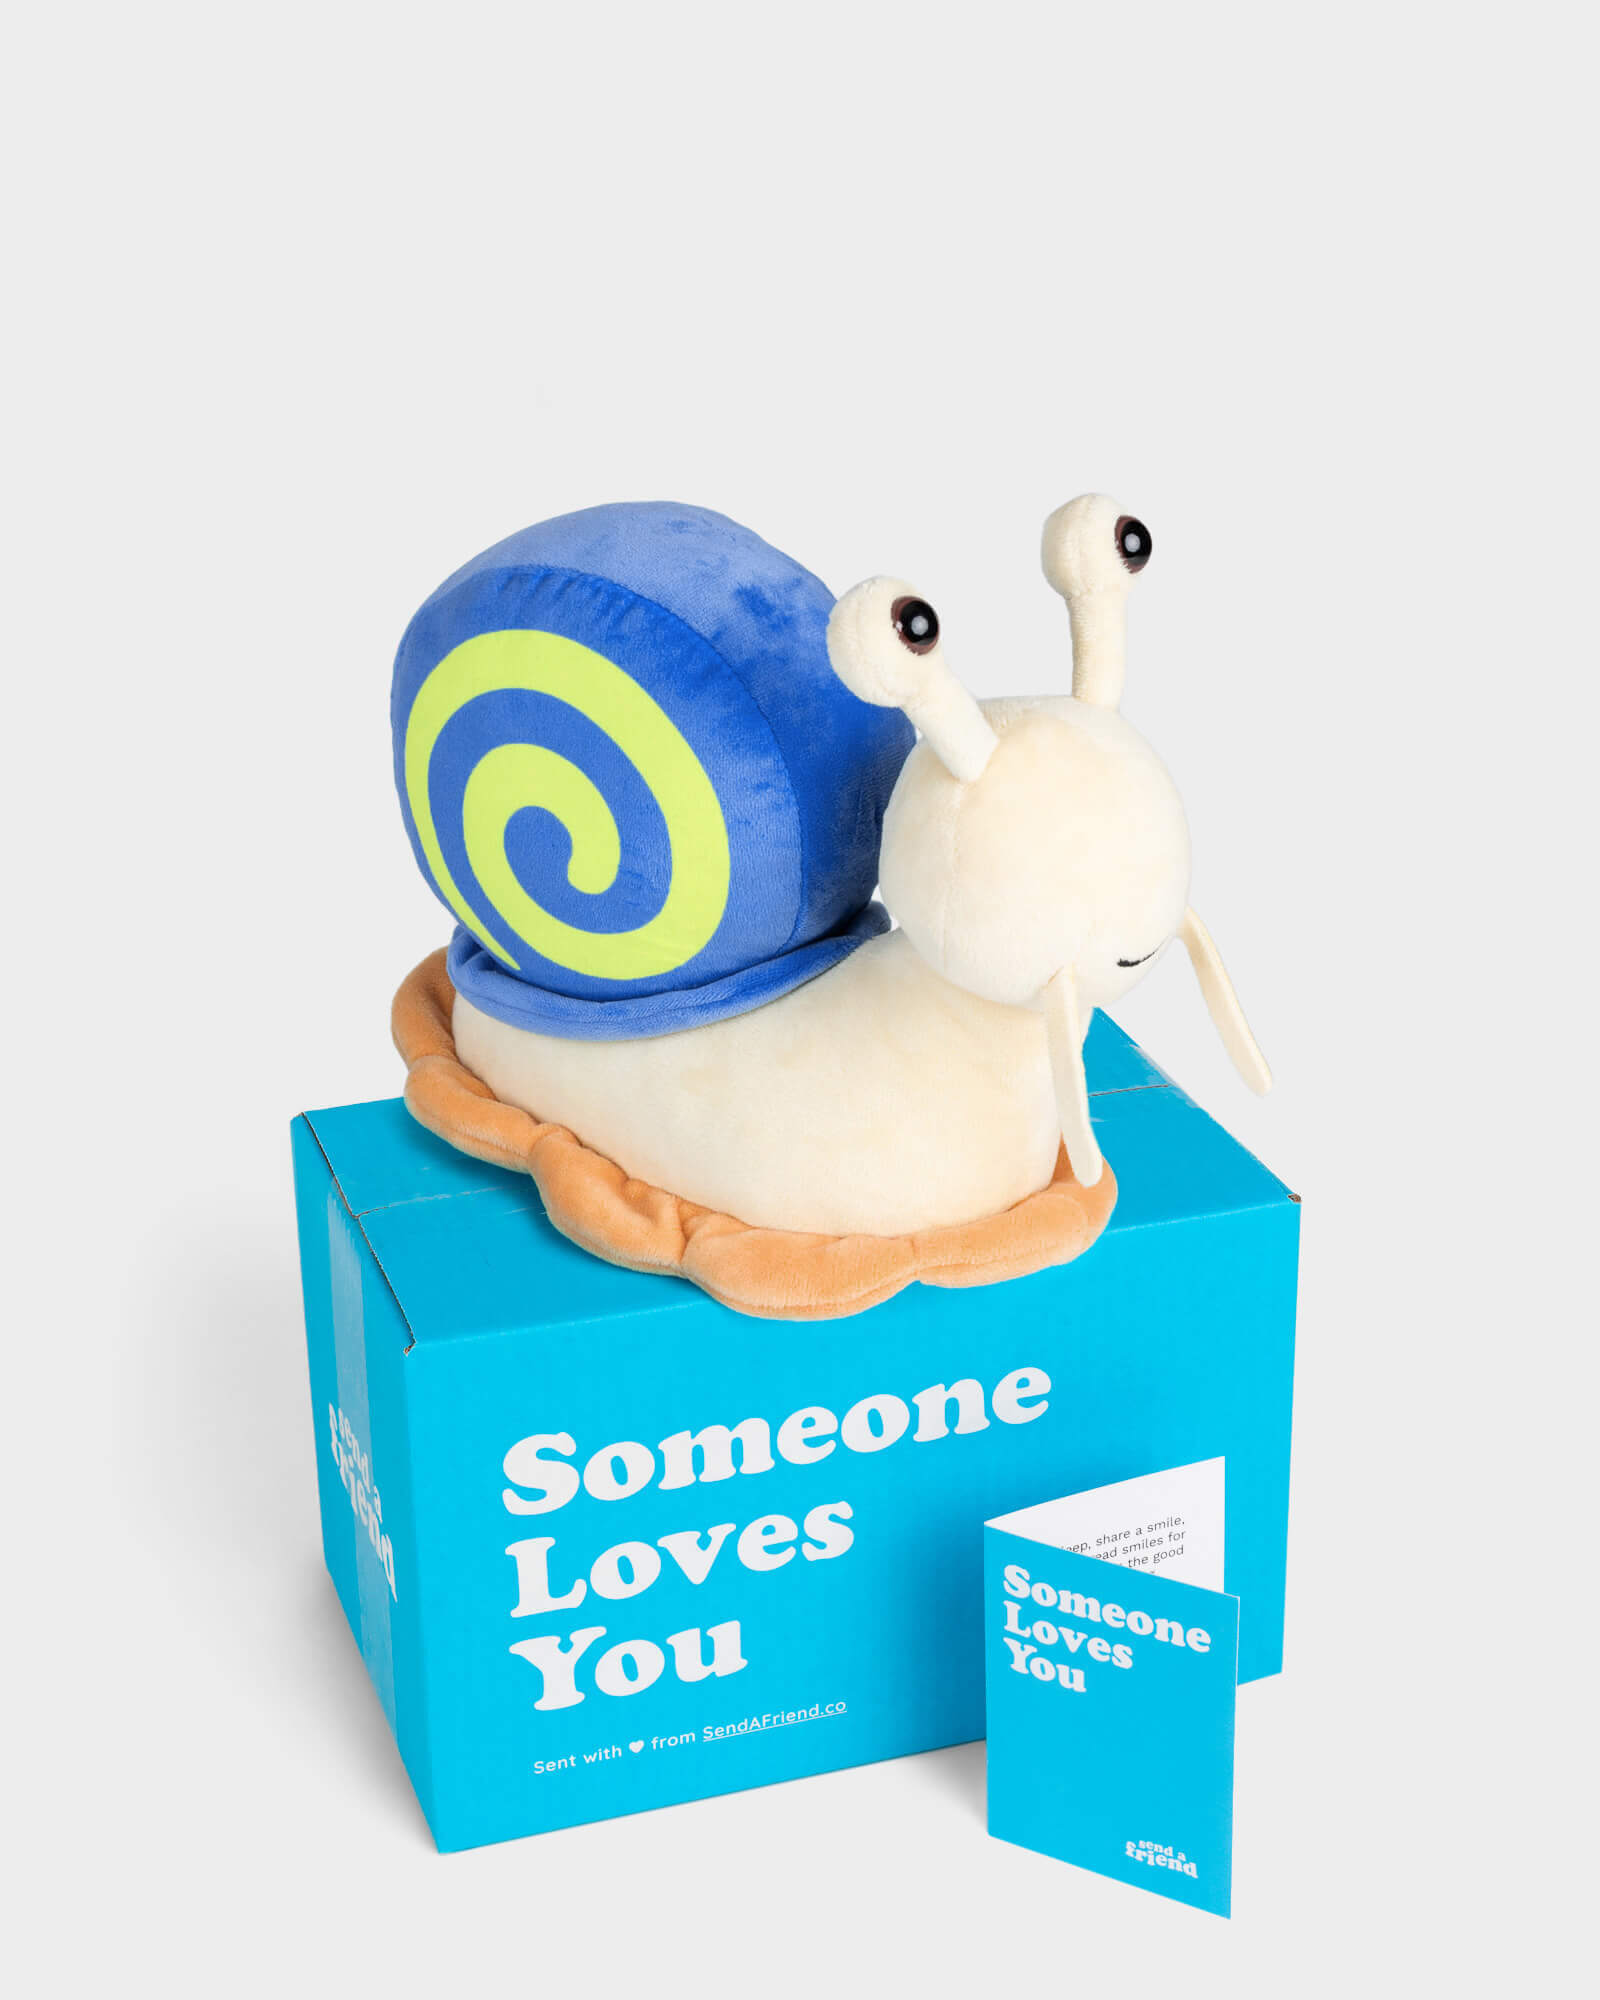 Side view photo of Shelly the Snail plushie (blue shell, white body, tan bottom), Someone Loves You box, and note card